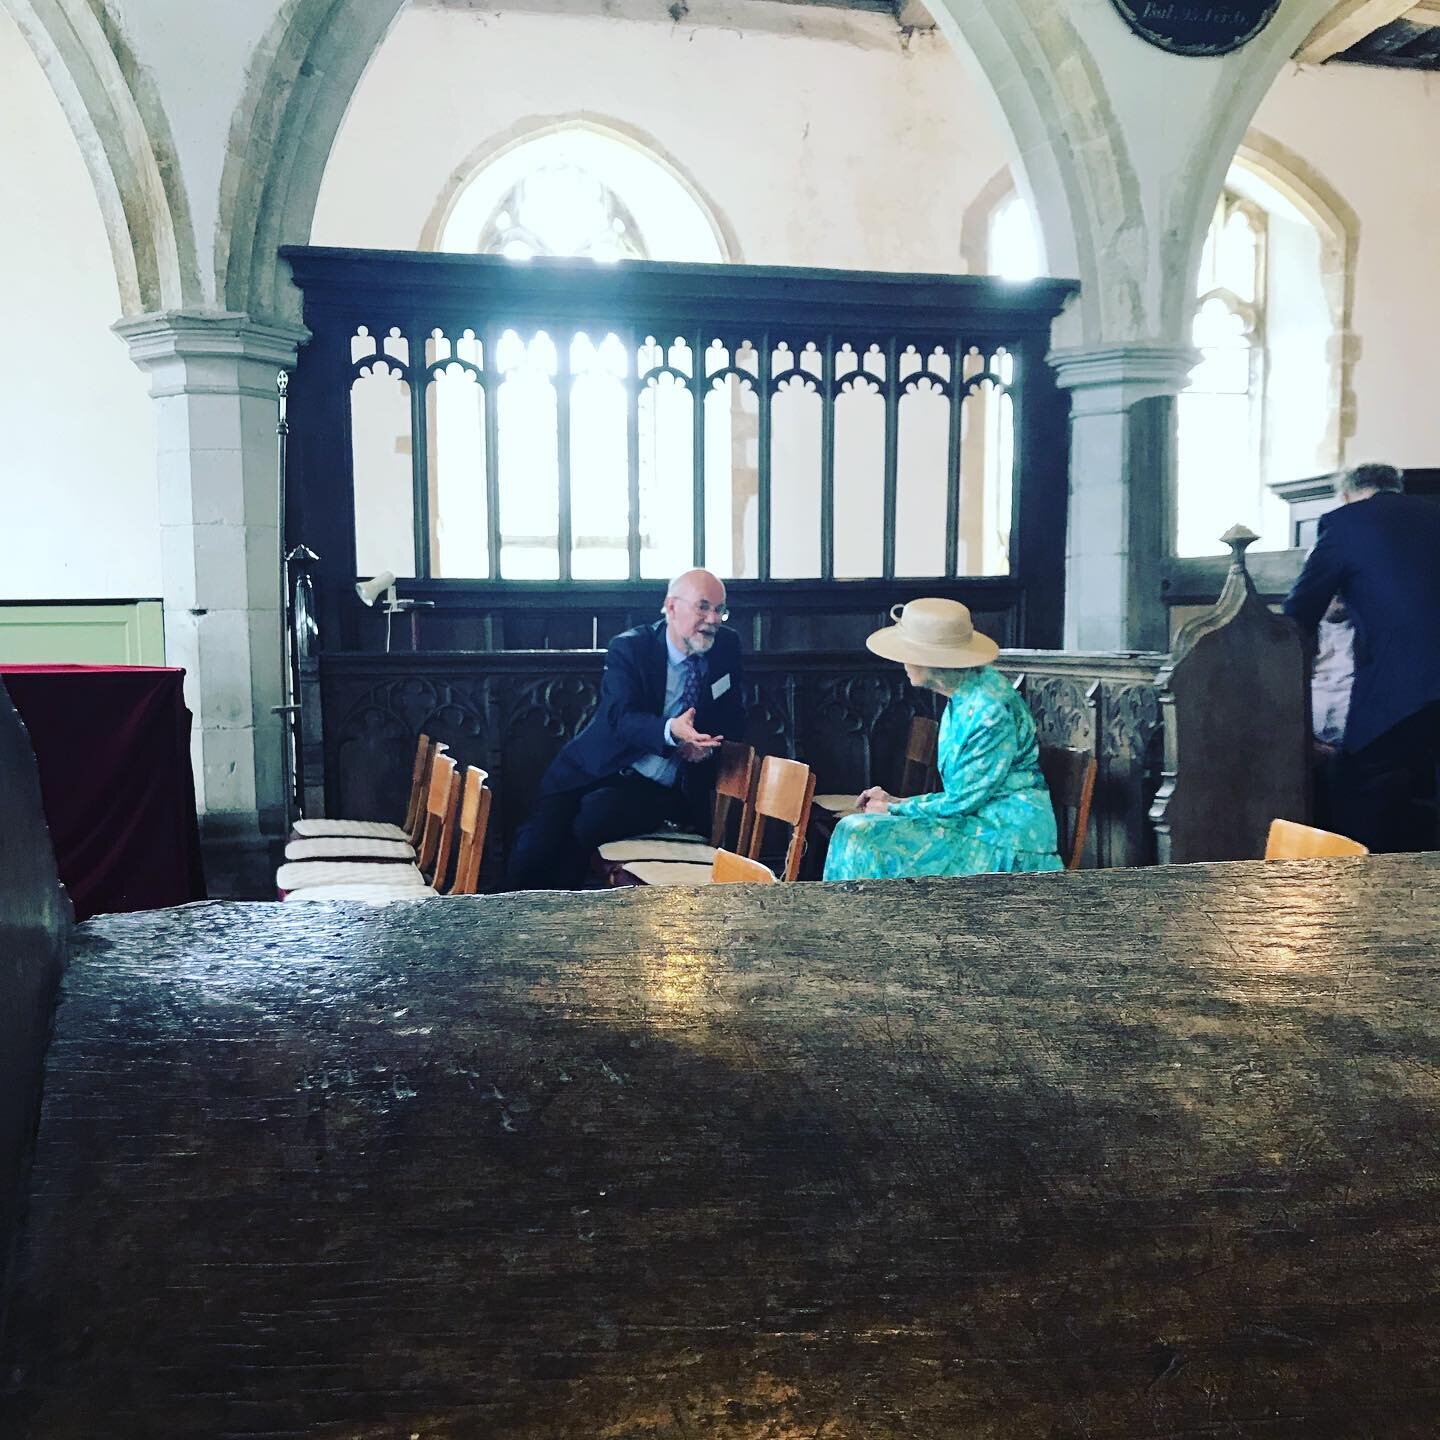 Princess Alexandra&rsquo;s guide for her day visiting the churches was our very own John Hendy. #churchguide #royalvisit #fountainofknowledge #romneymarshchurches #guidedtour #princessalexandra